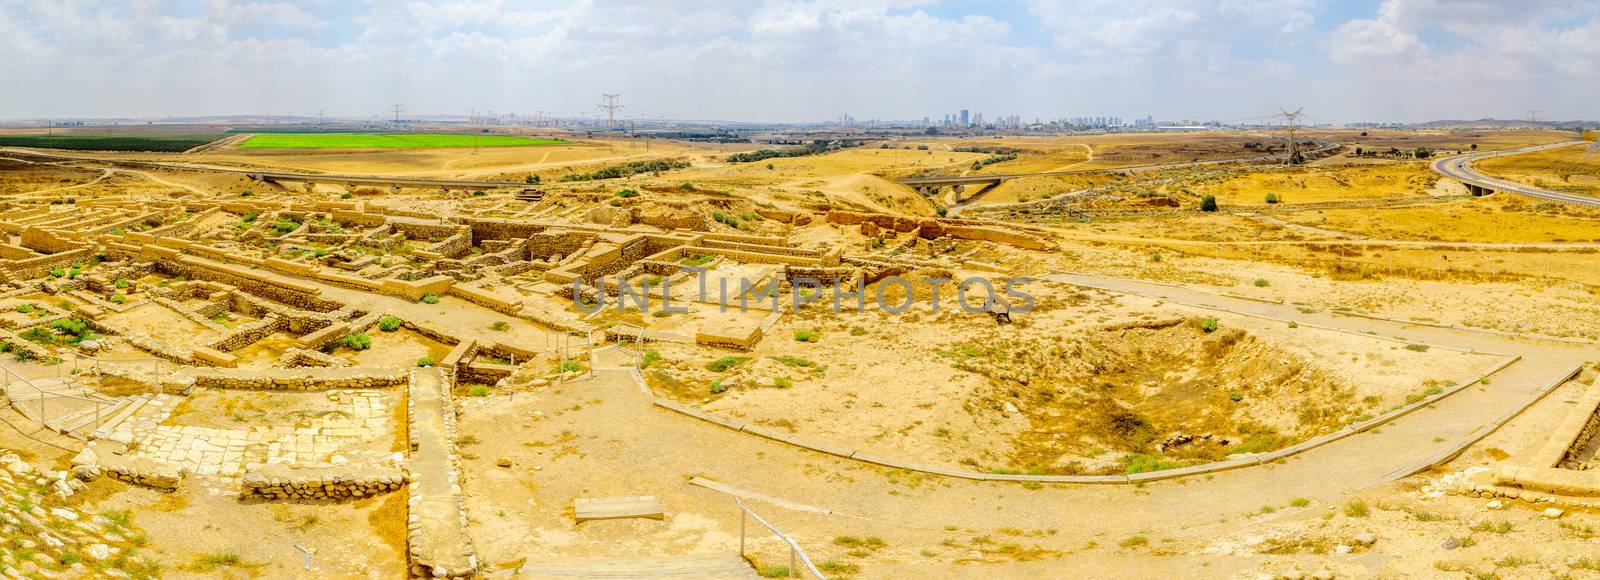 Panoramic view of Tel Beer Sheva archaeological site, believed to be the remains of the biblical town of Beersheba. Now a UNESCO world heritage site and national park. Southern Israel